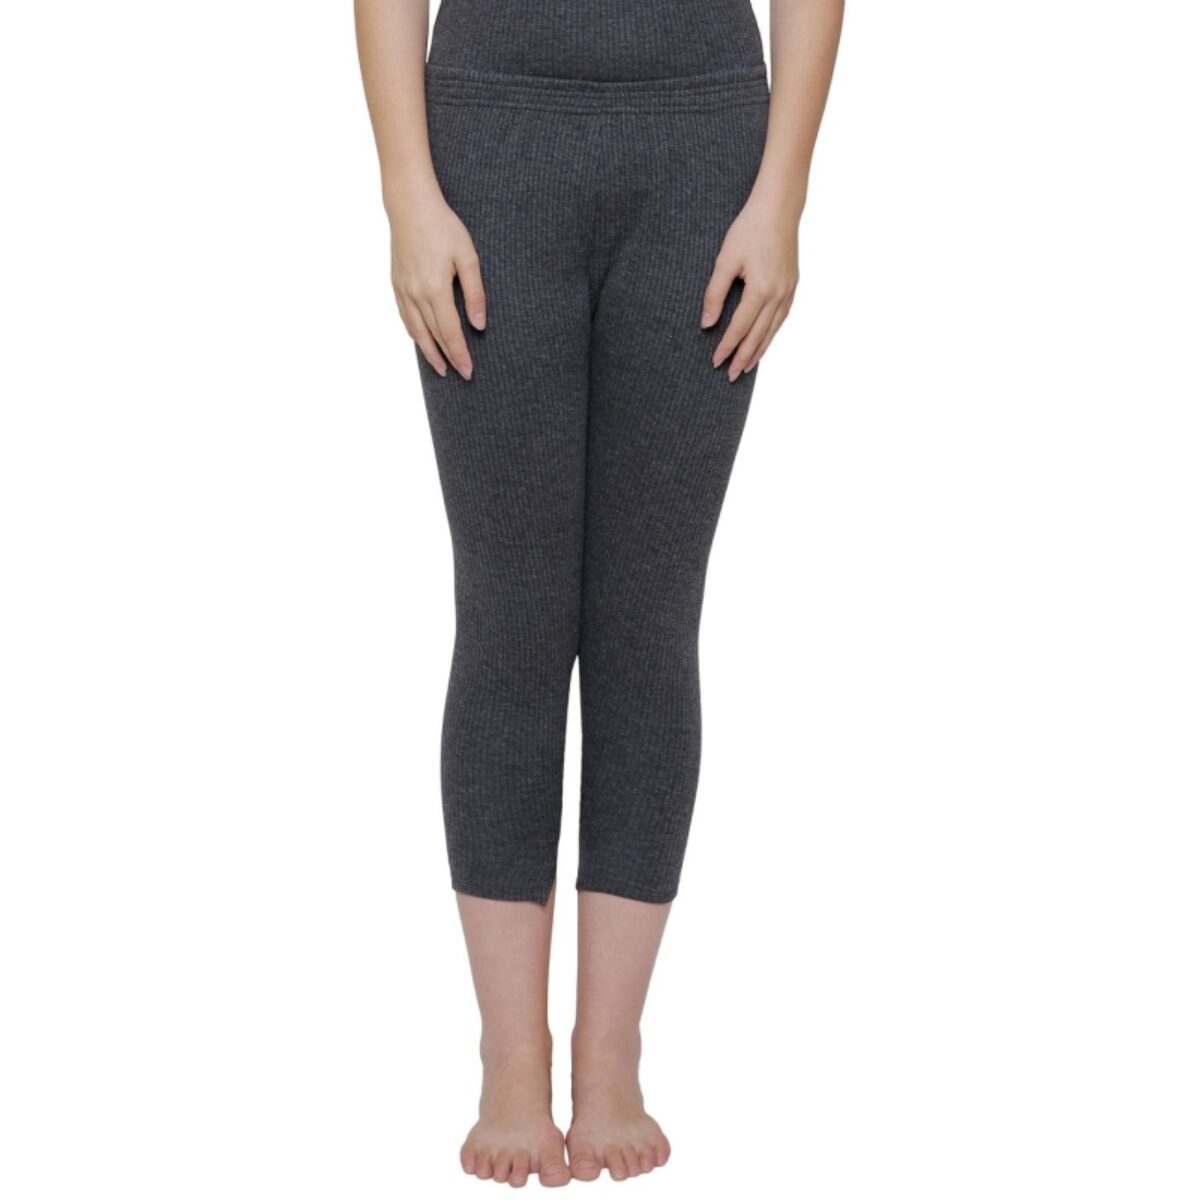 Buy Thermal Women Bottom Online Available - Bodycare